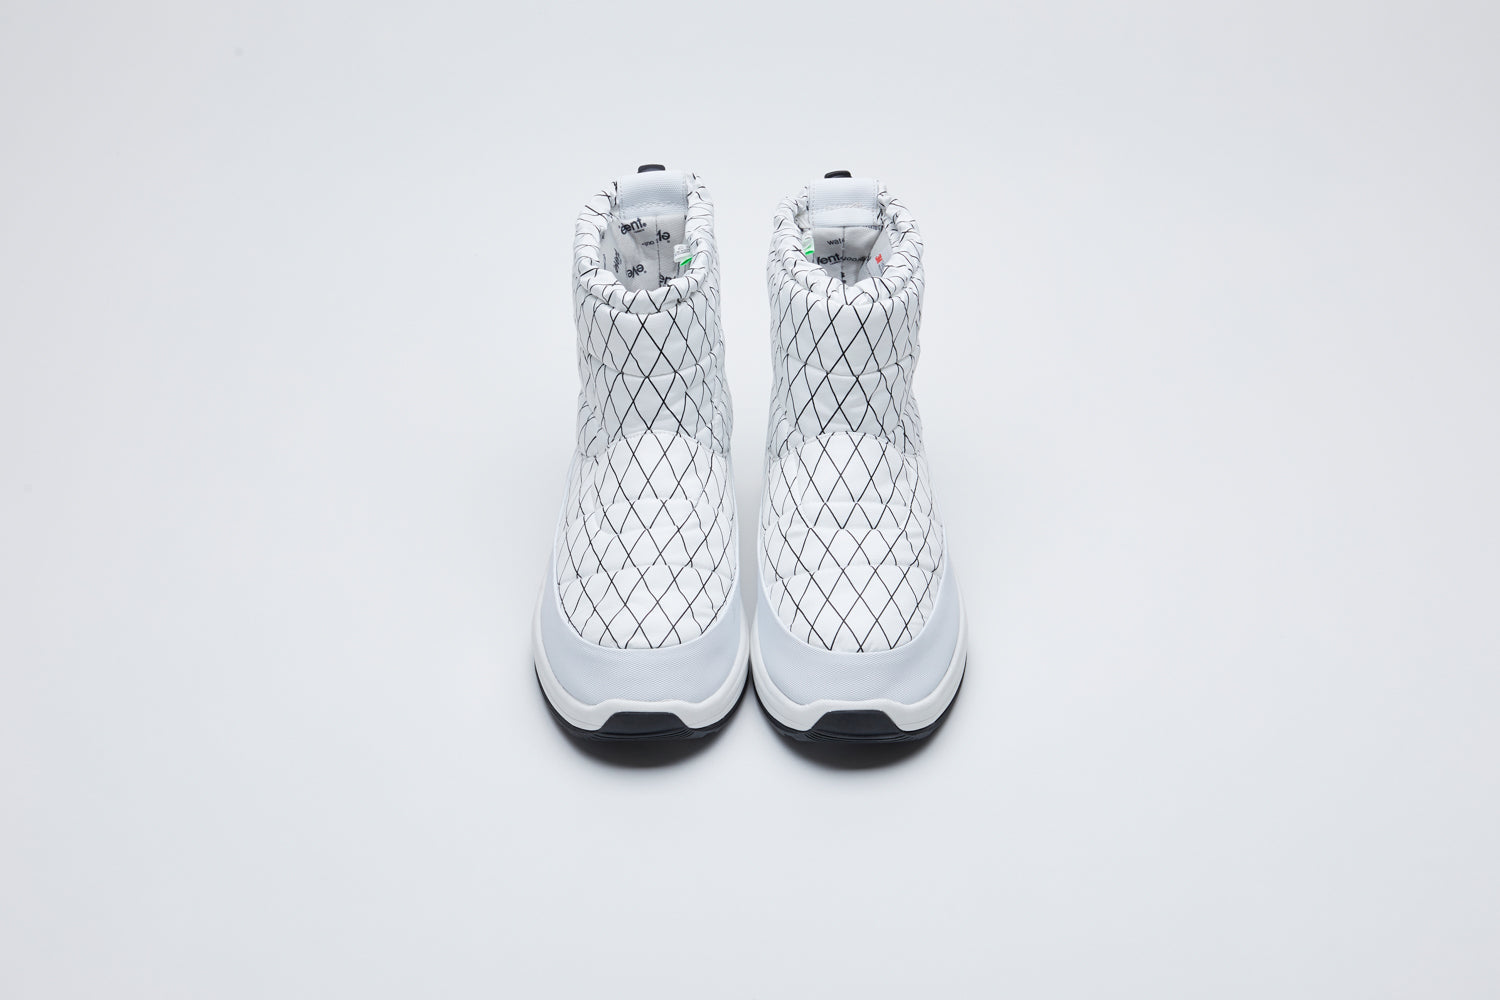 SUICOKE PEPPER-evab-PT1 ankle cut boots with white nylon upper with black outlined diamond print and running sole with adjustable toggle cord closure. From Fall/Winter 2021 collection on SUICOKE Official US &amp; Canada Webstore.